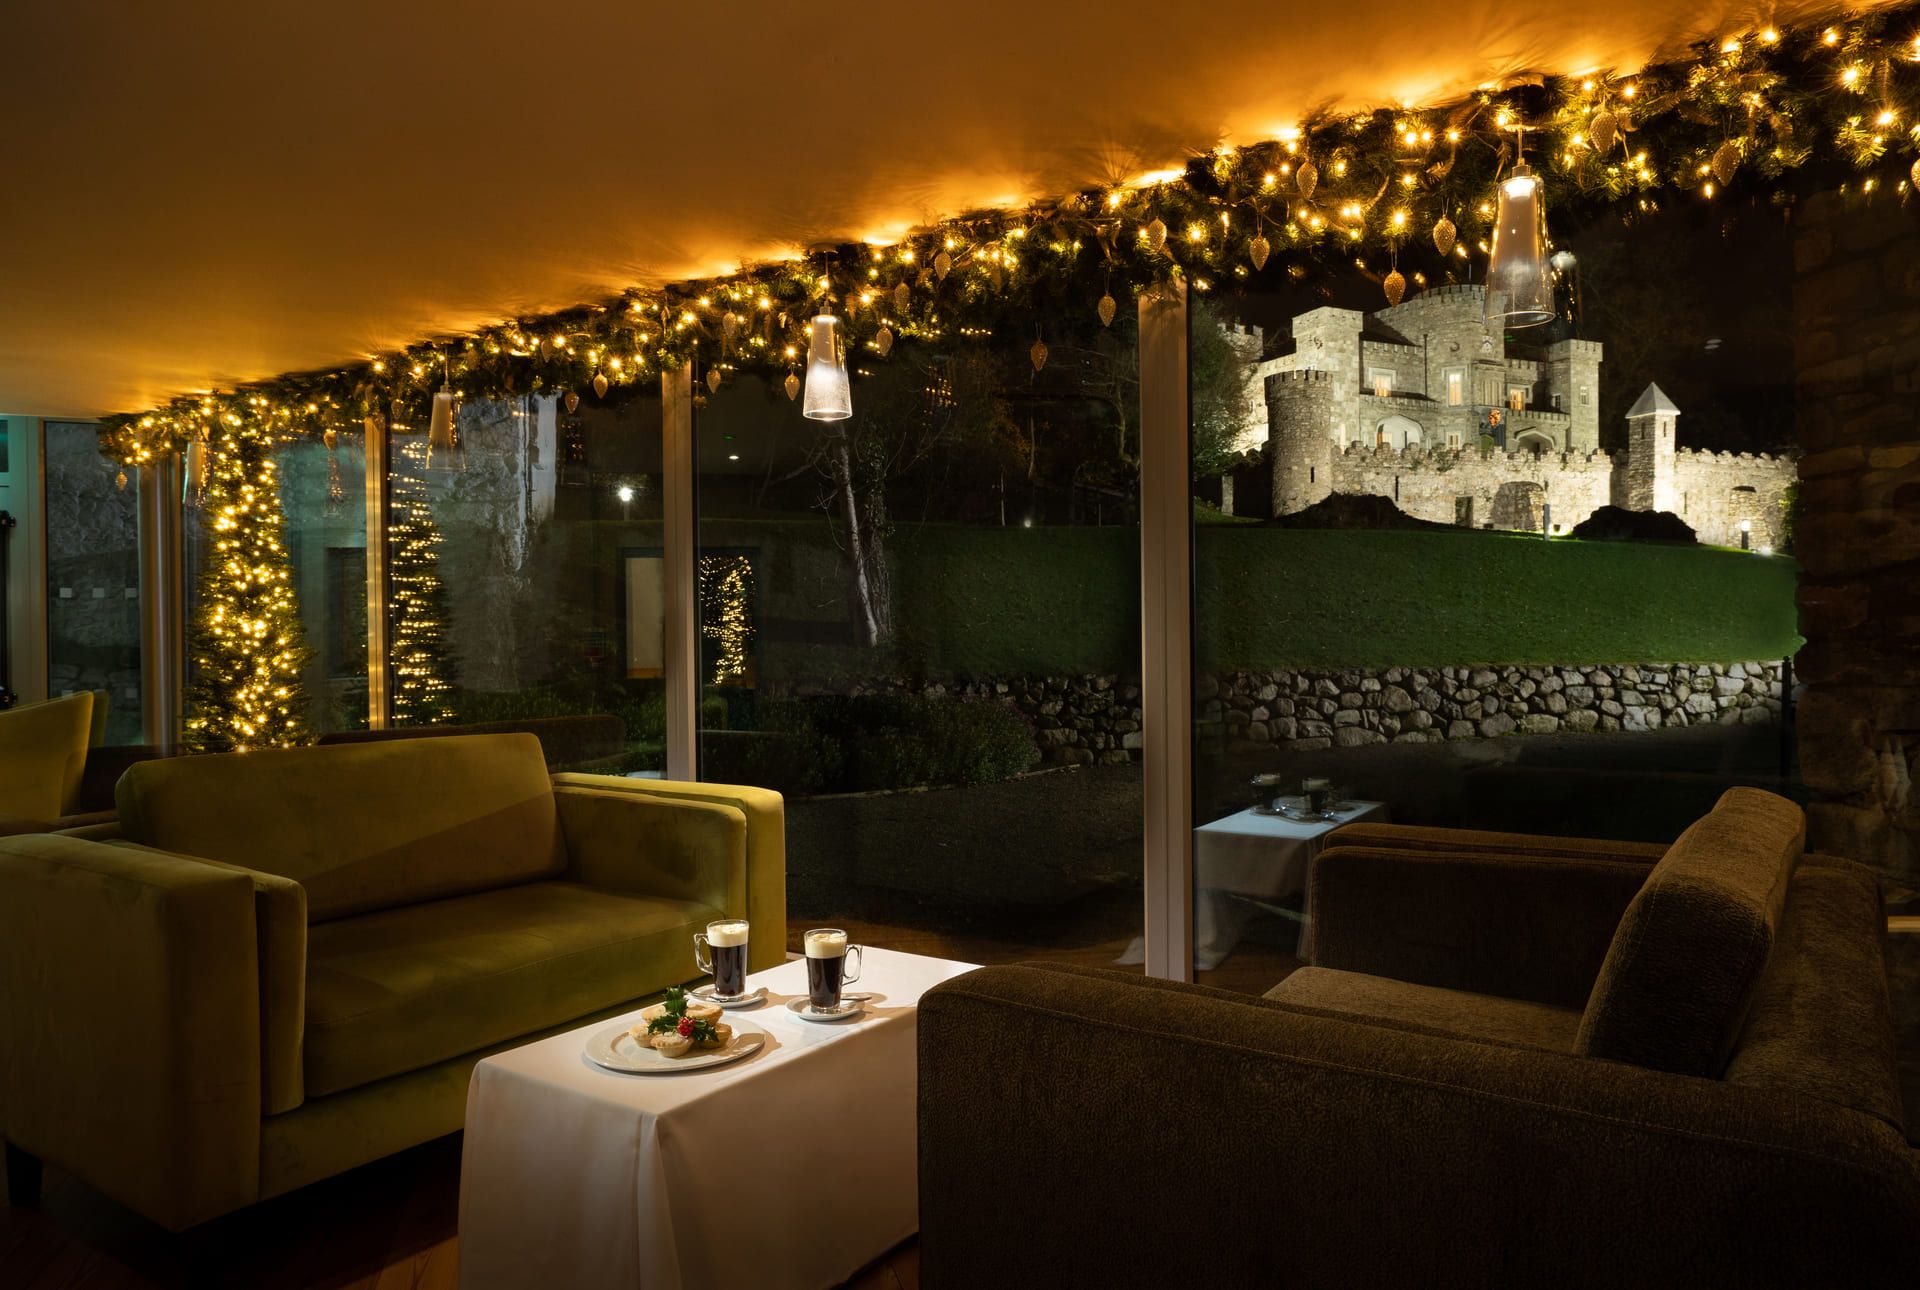 Celebrate New Year at killeavy castle